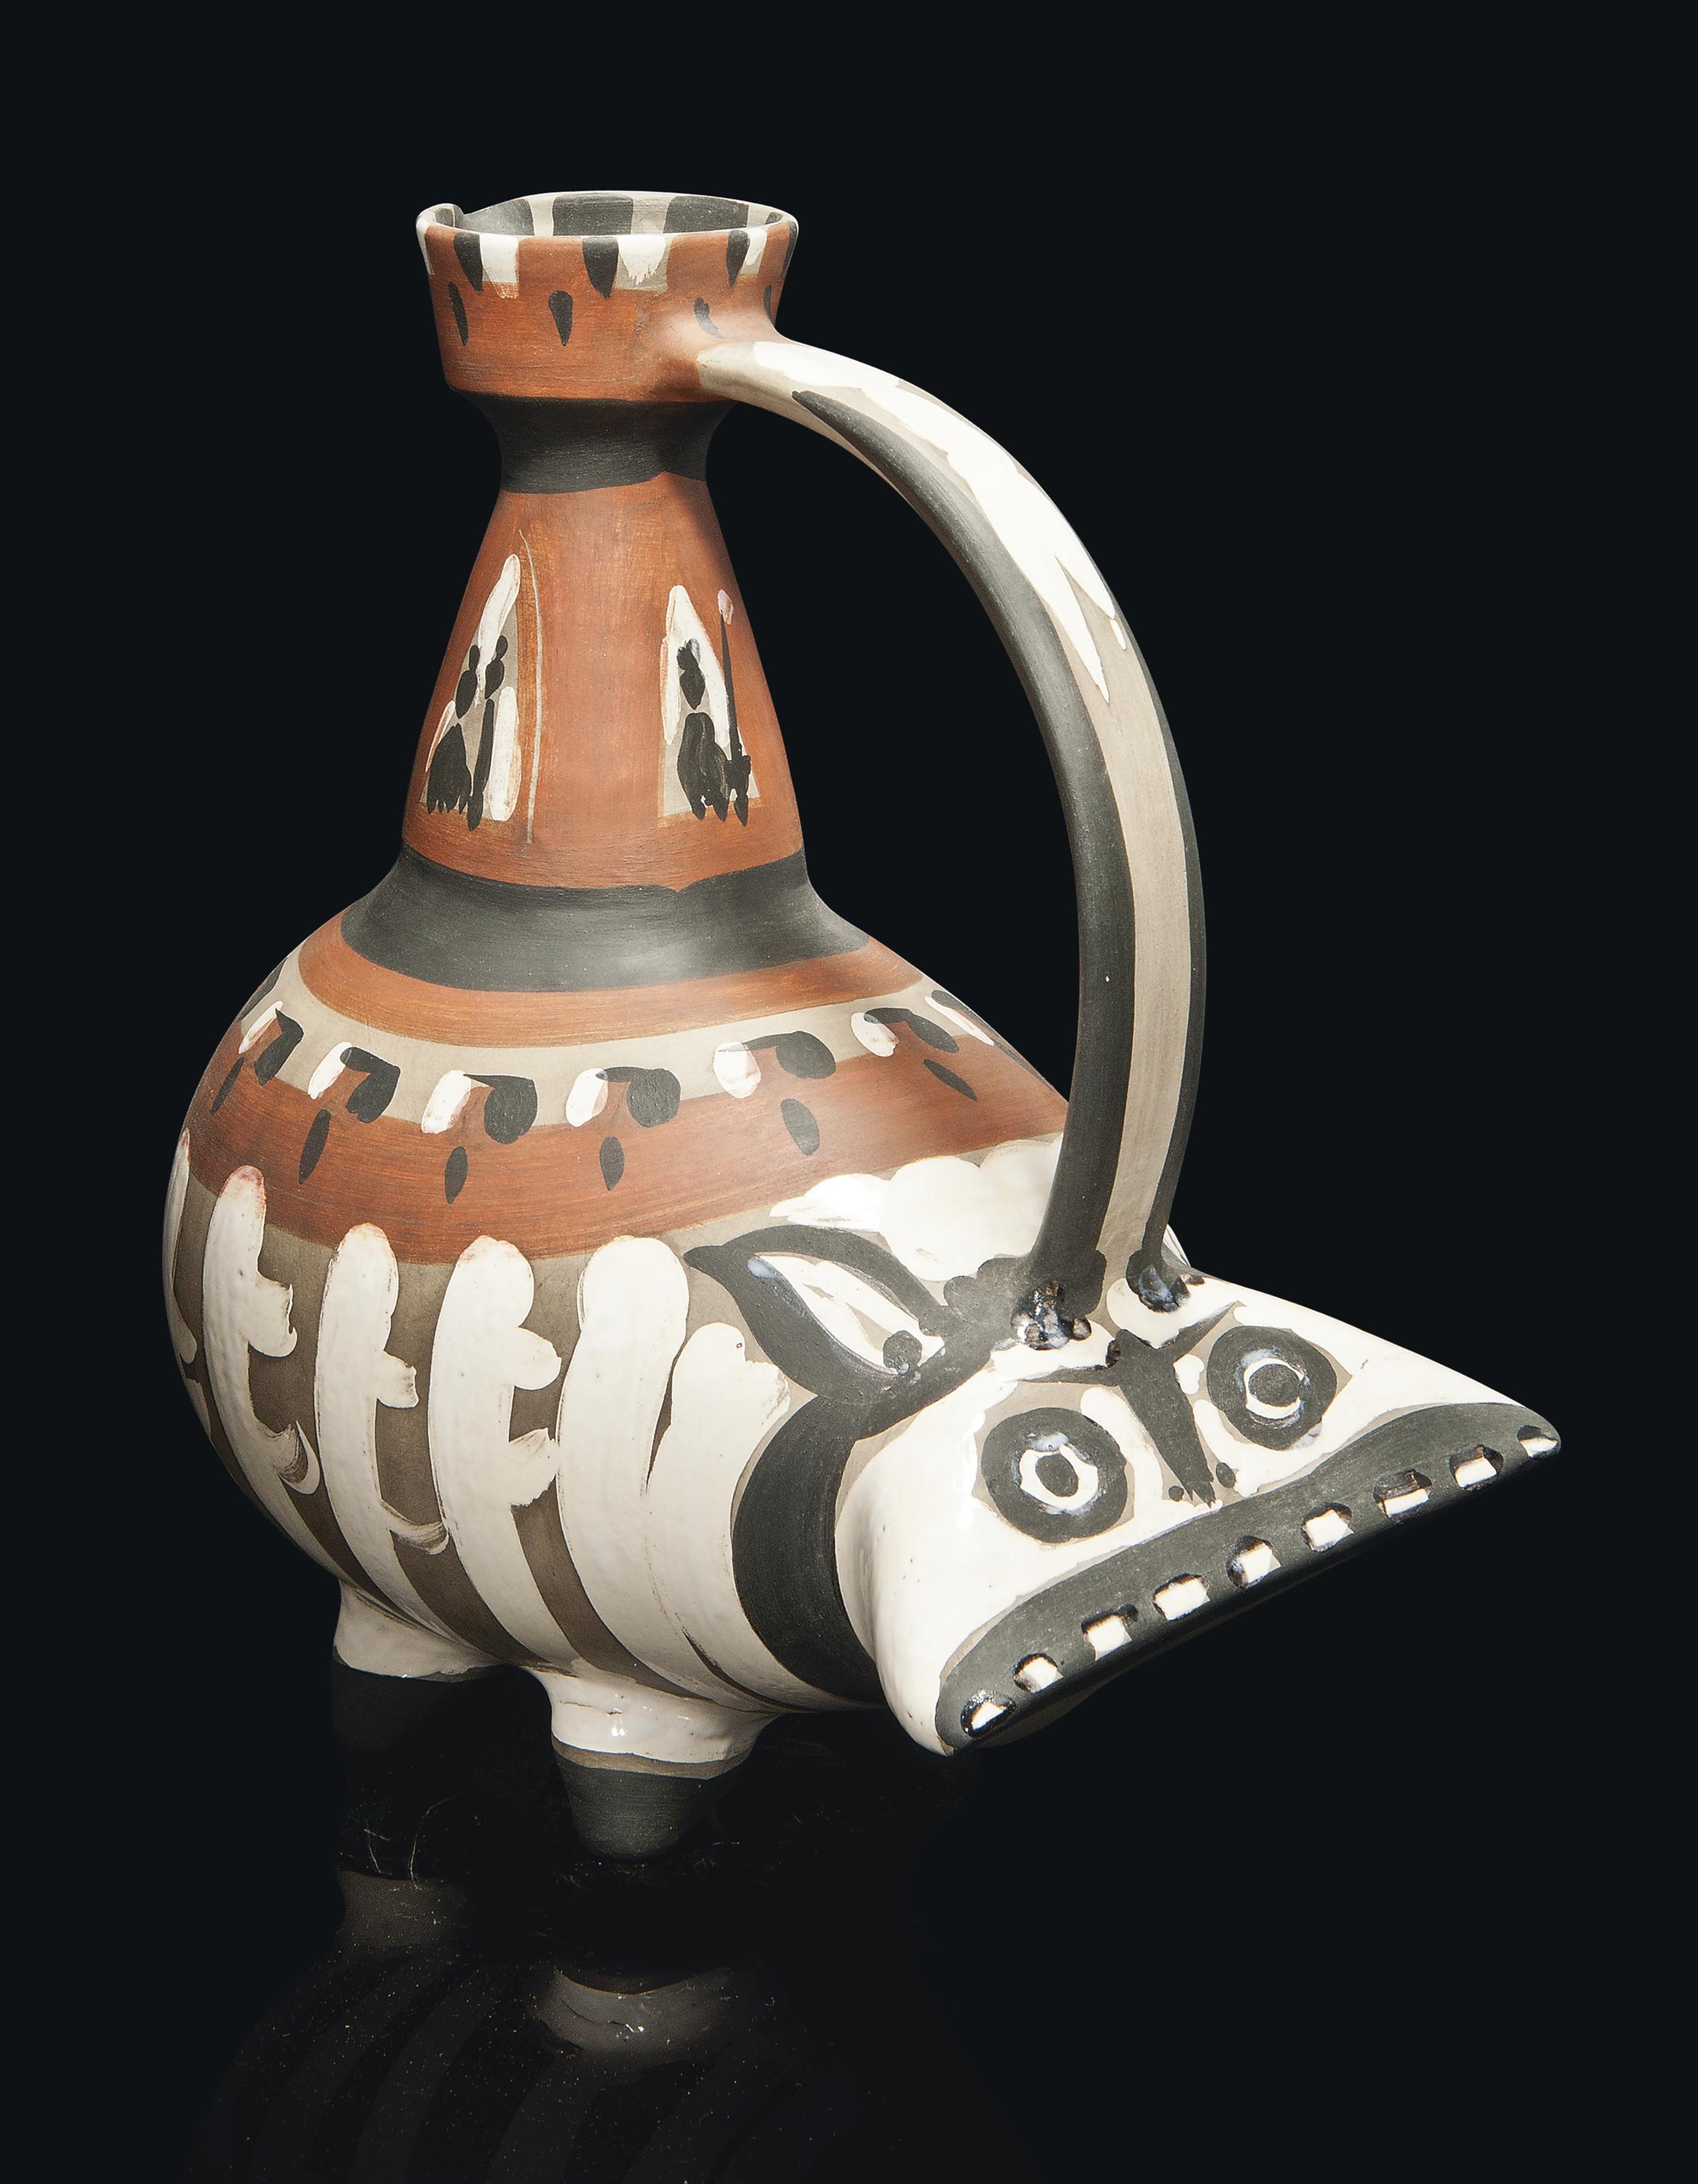 Picasso left lasting mark on Madoura art pottery